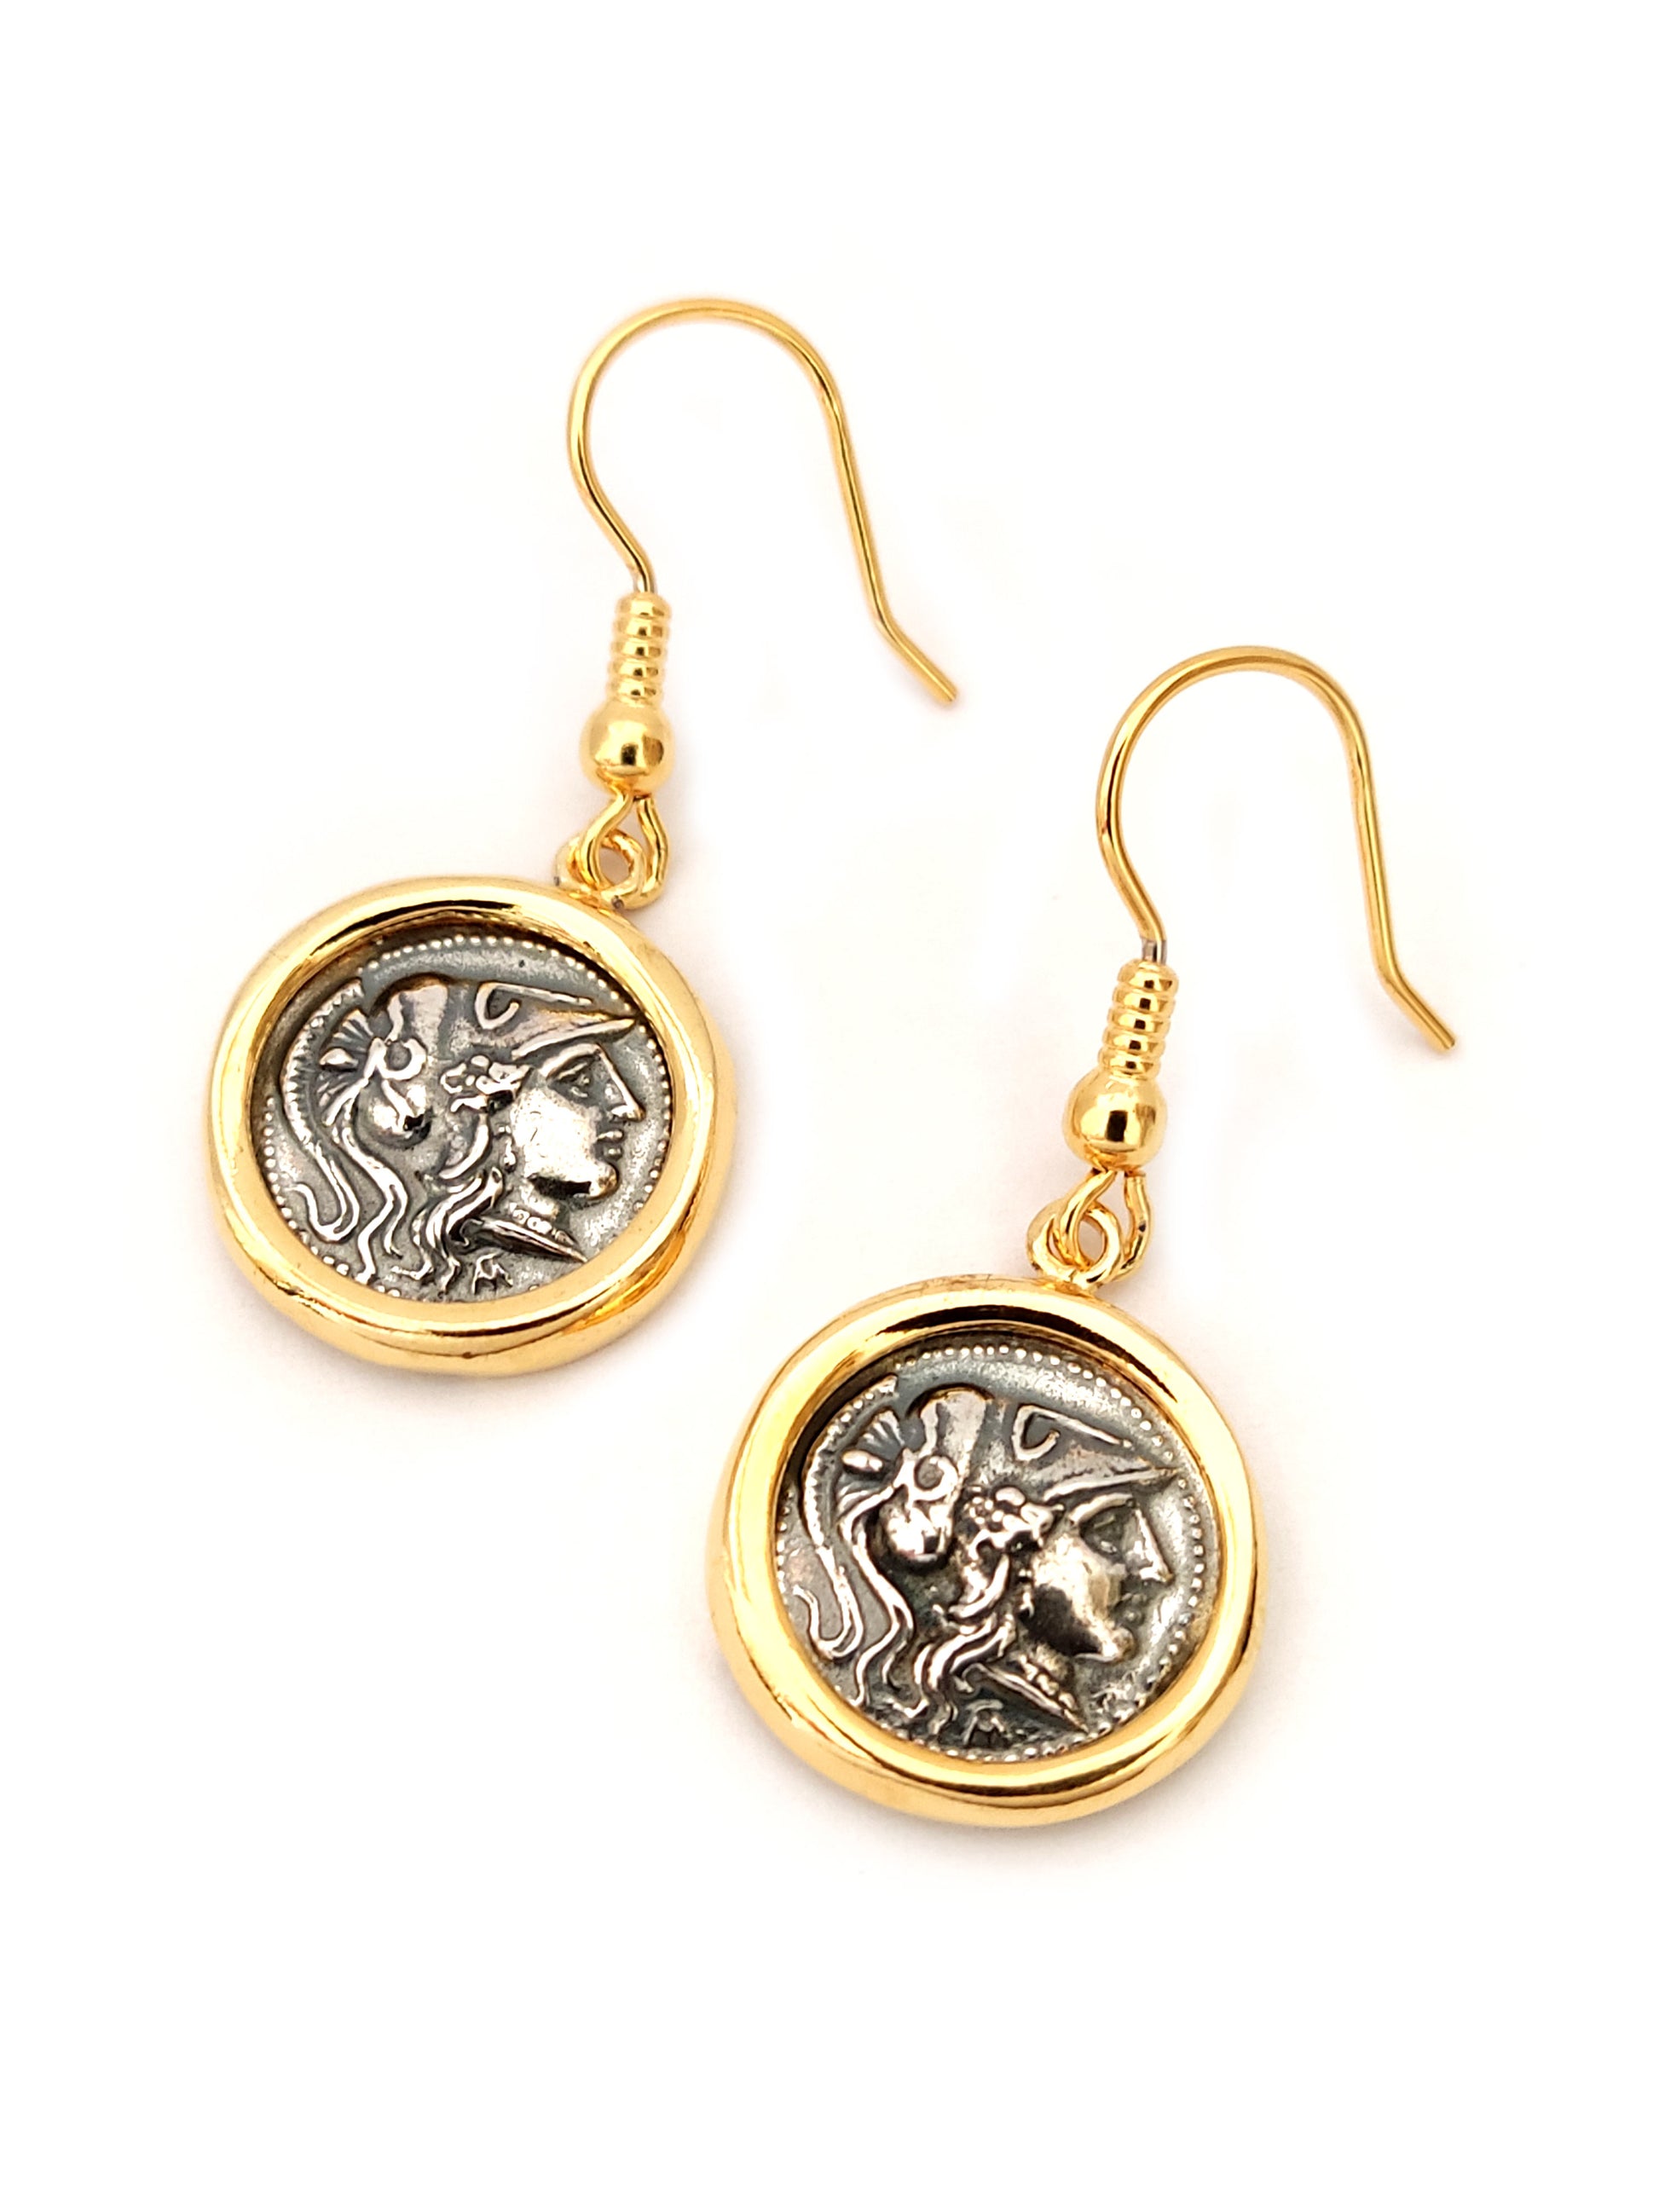 Greek silver dangle earrings with goddess Athena and gold plated finish on white background.